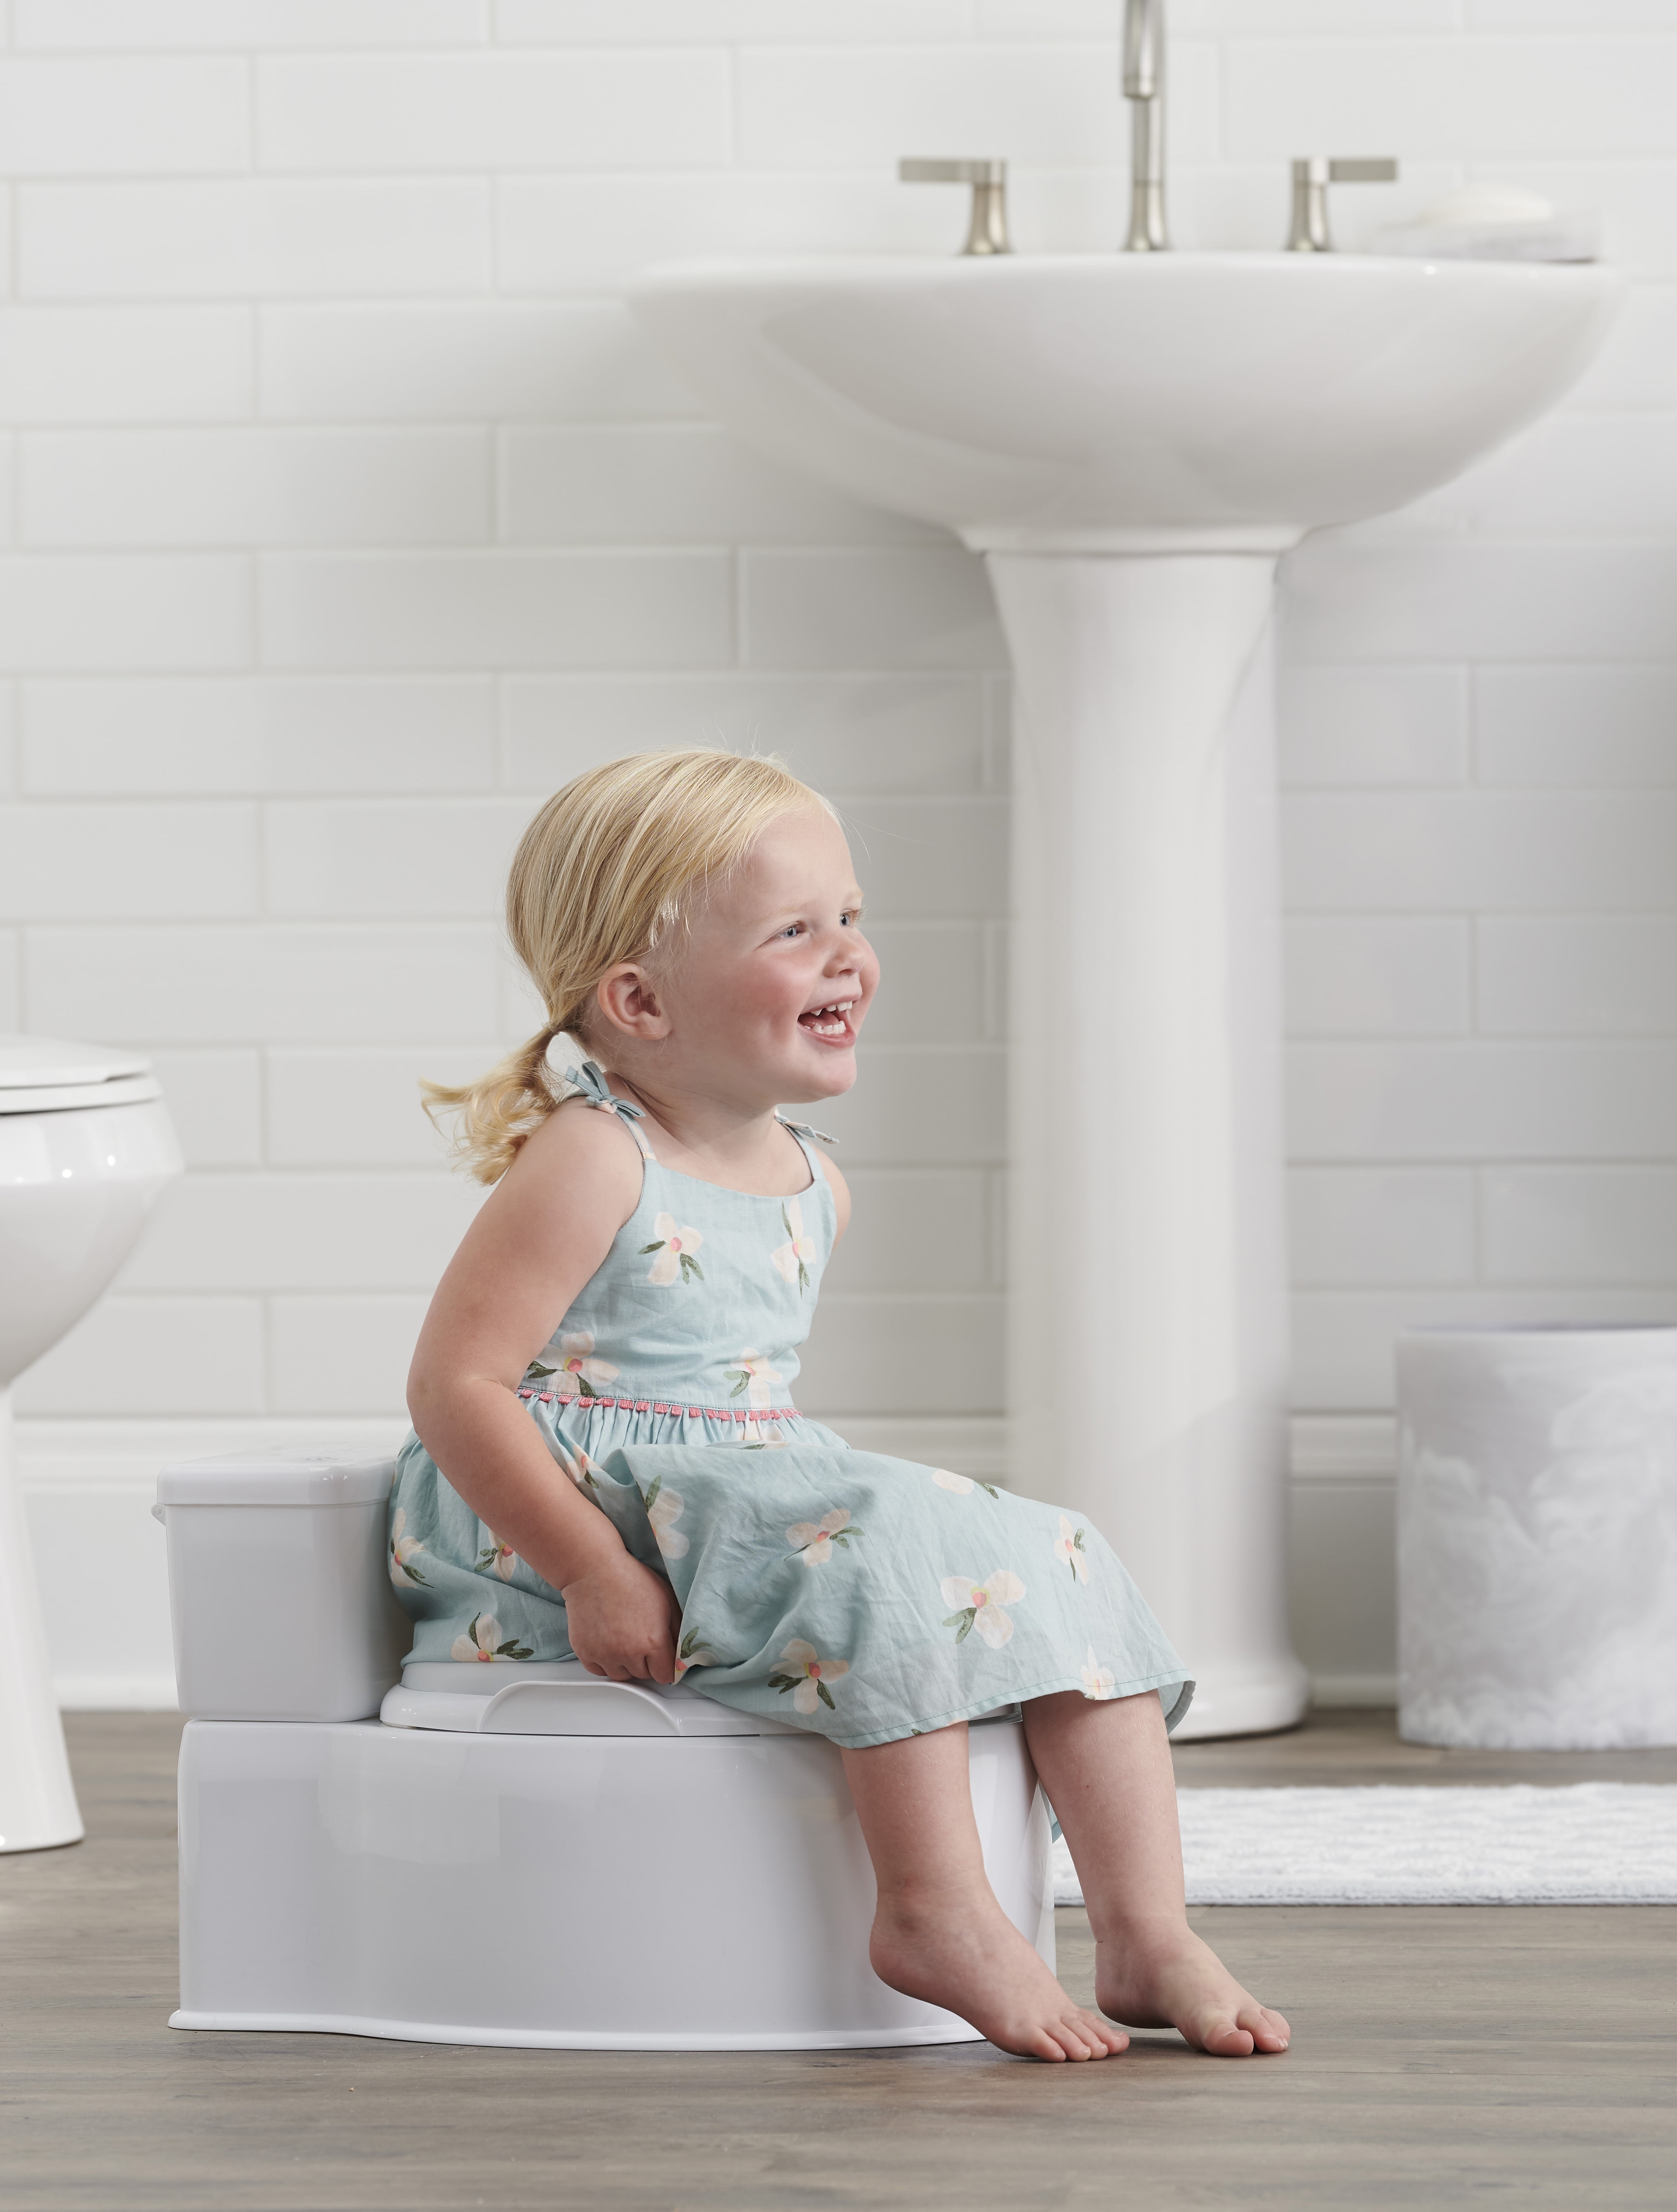 with Flushing Sounds and Wipe Potty Training Toilet for Toddler Boys & Girls 